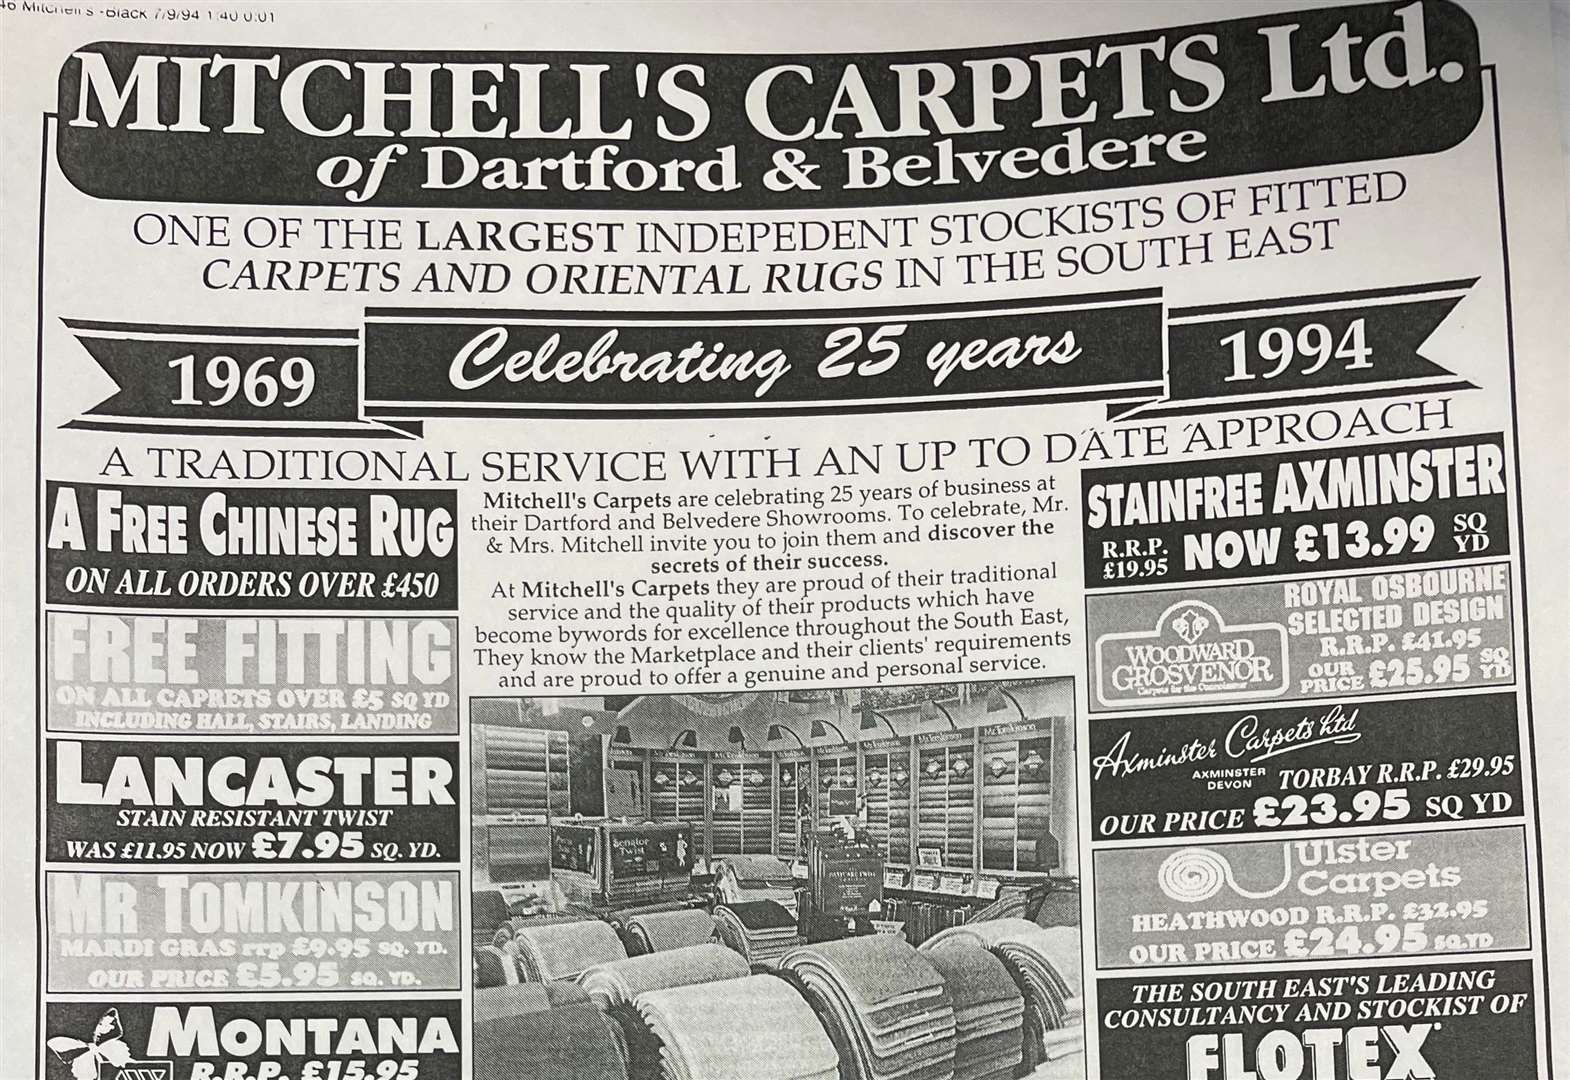 An old advert celebrating the firm’s 25th anniversary